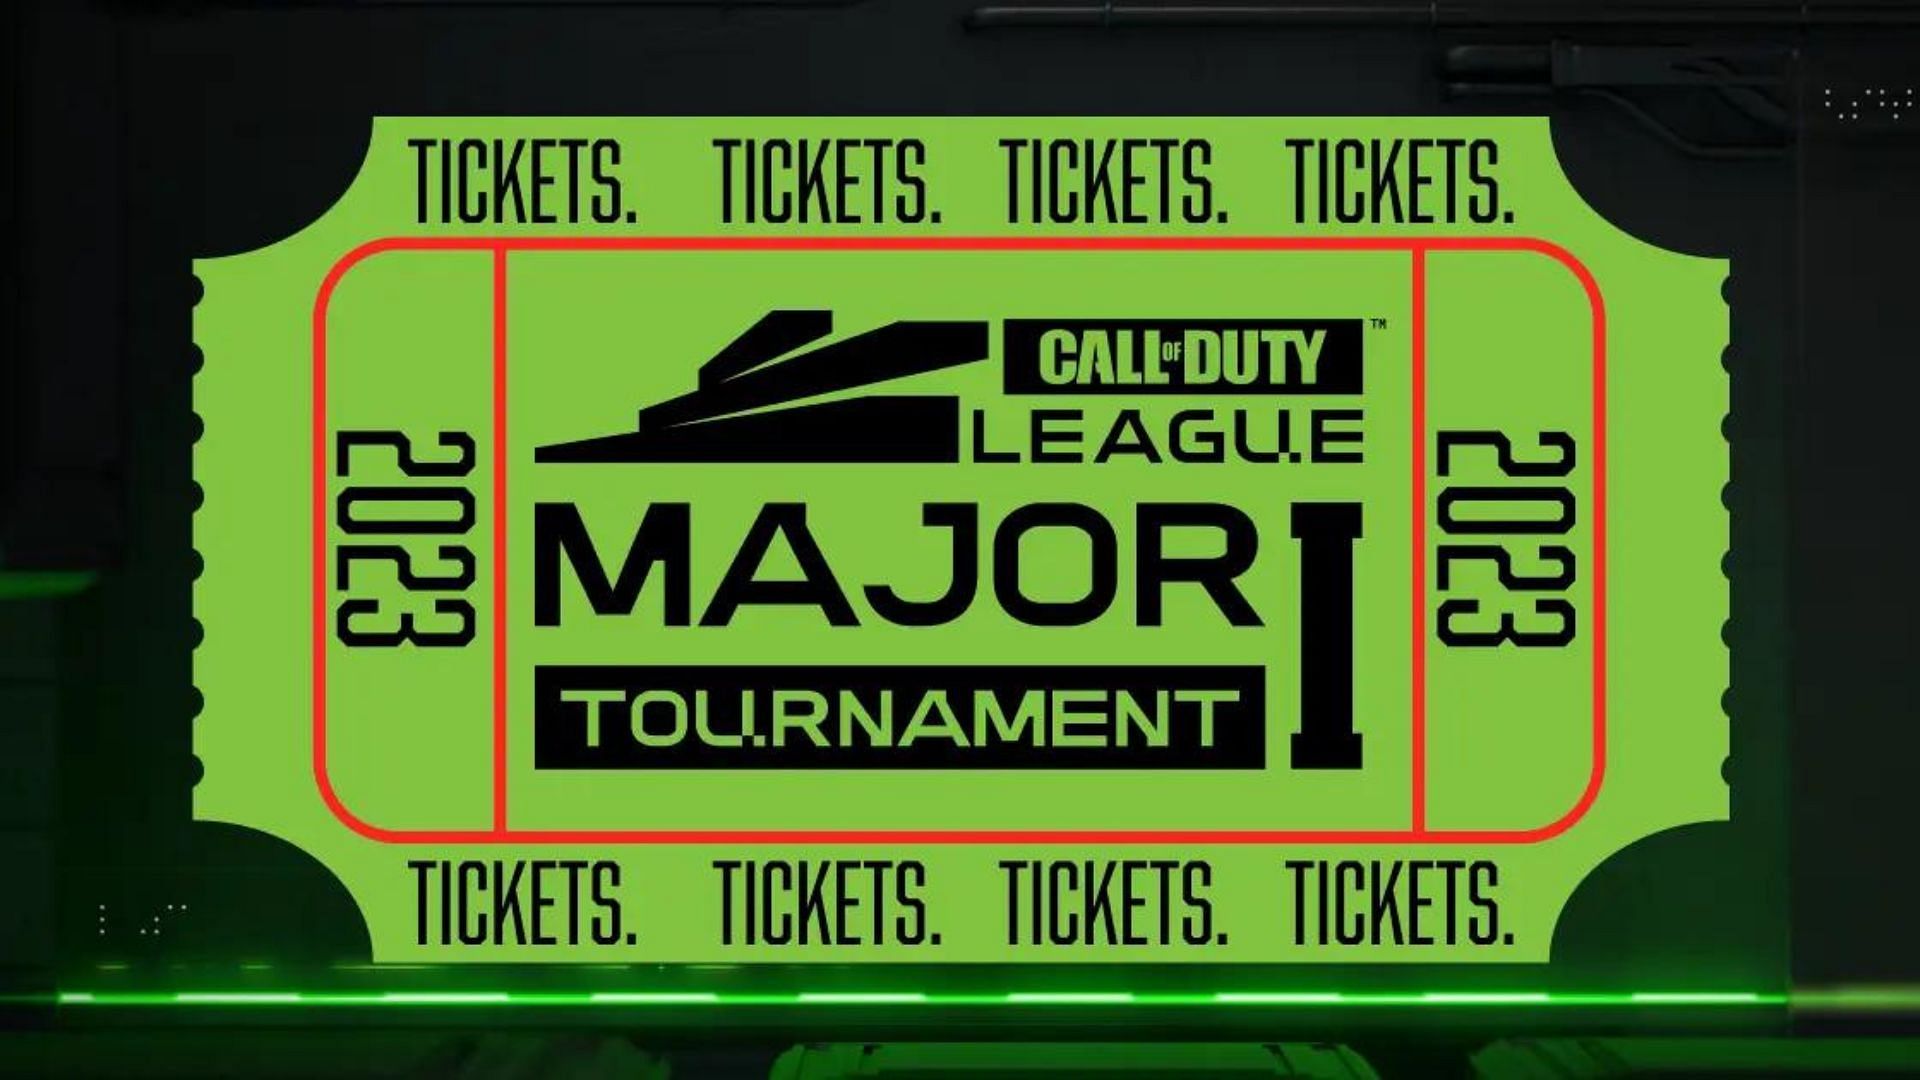 How to buy tickets for Call of Duty League 2023 Major I tournament